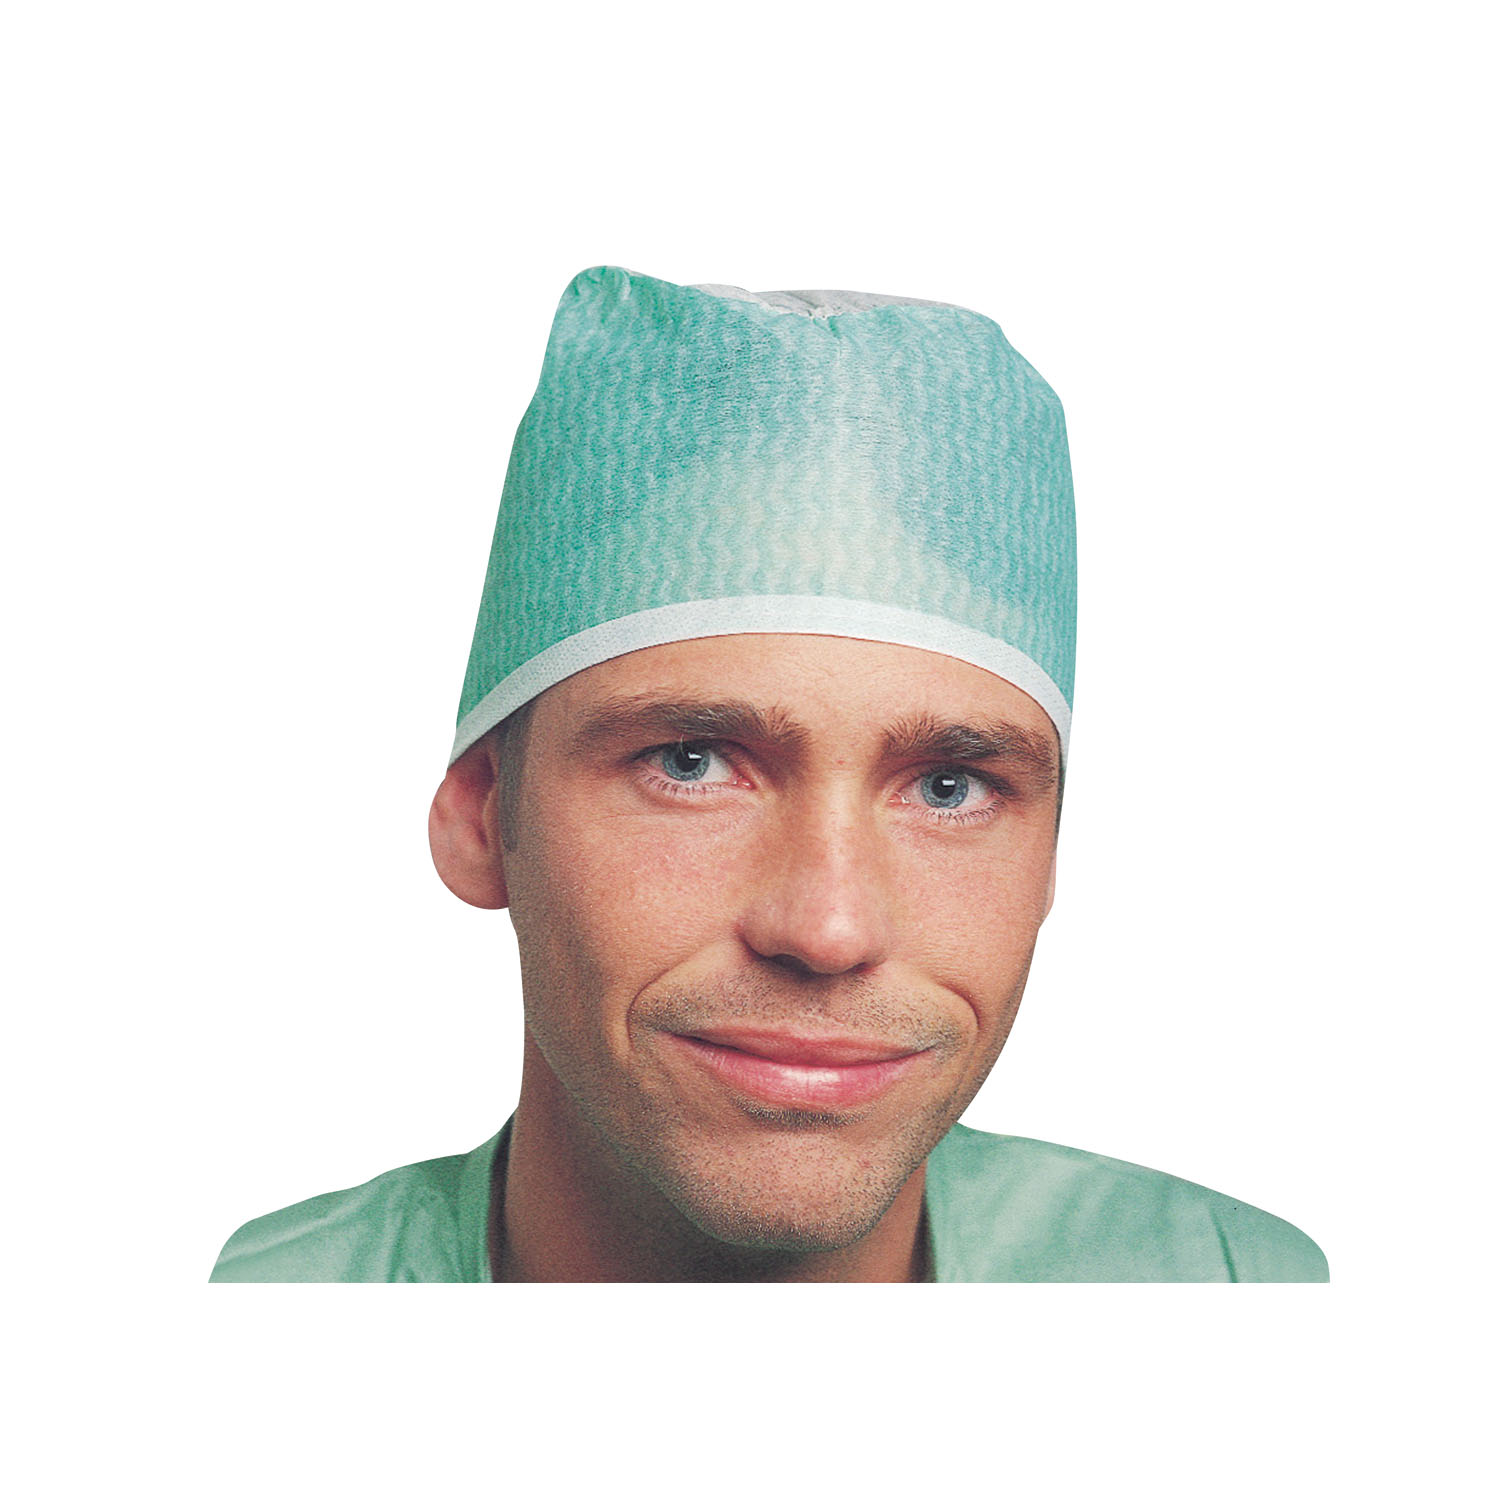 MOLNLYCKE BARRIER® SURGICAL CAP : 621301 BX